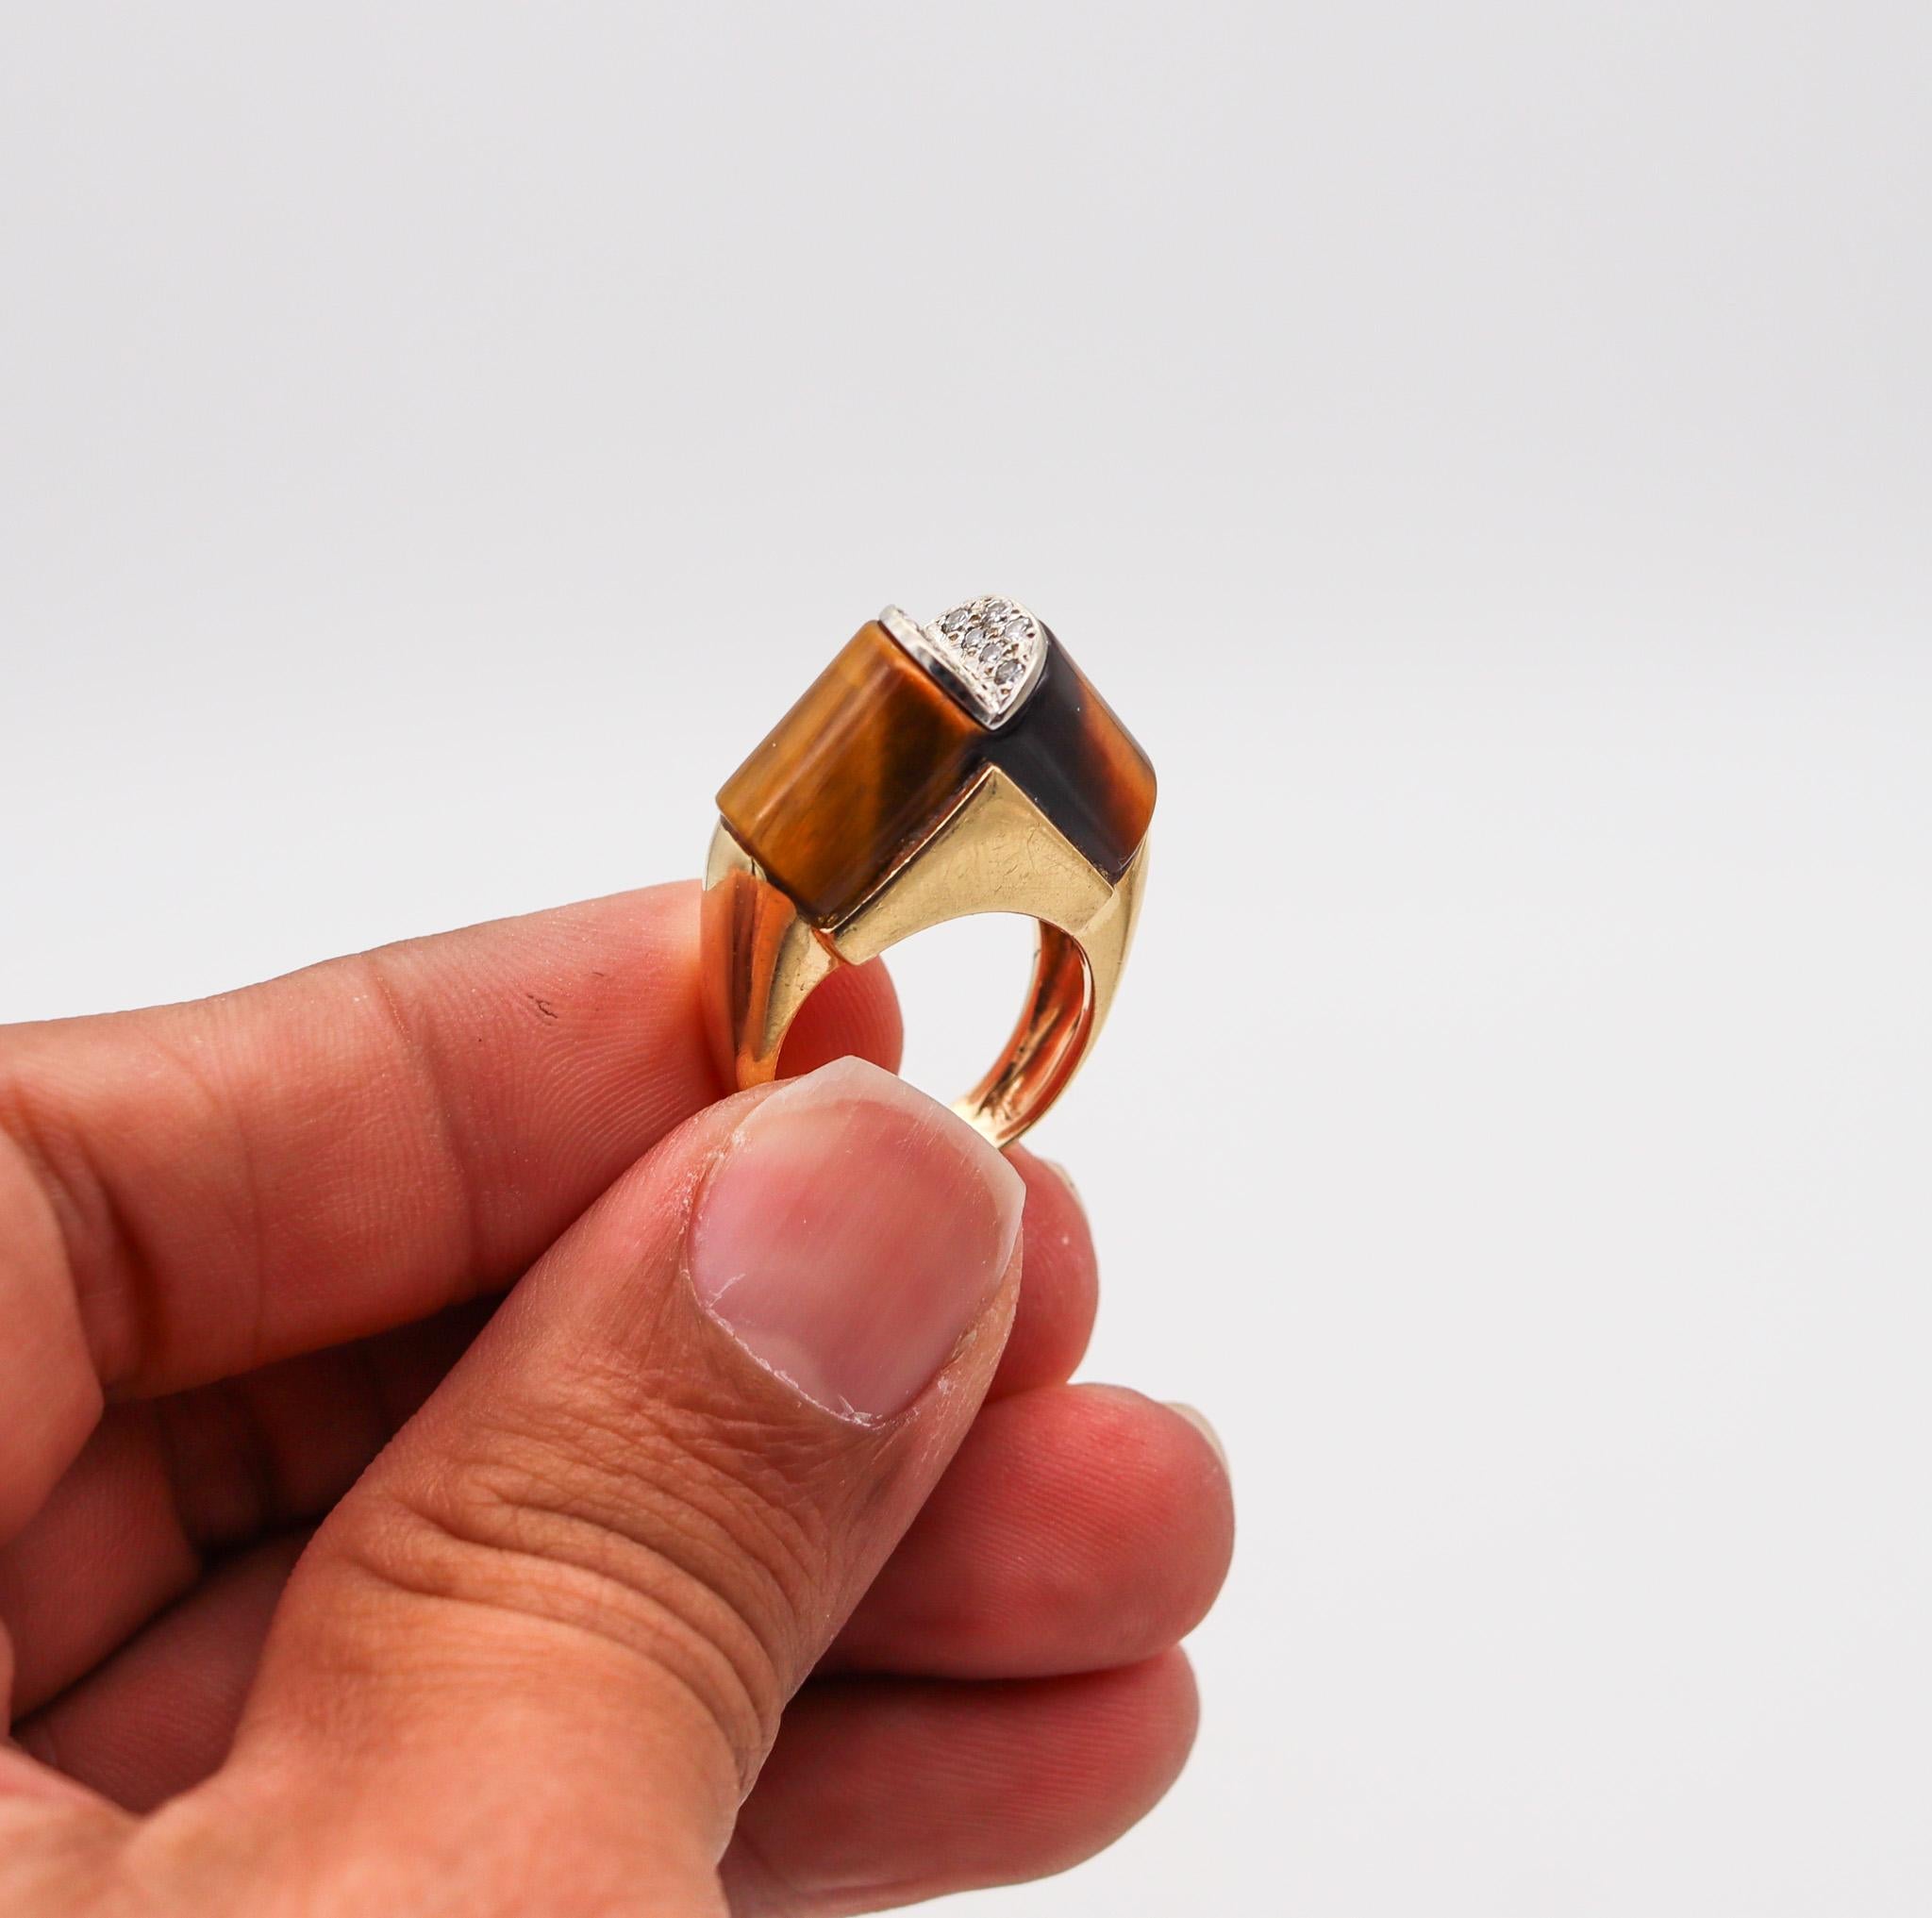 Modernist 1960 Sculptural Geometric Ring In 14Kt Gold With Diamonds & Tiger Eye For Sale 1